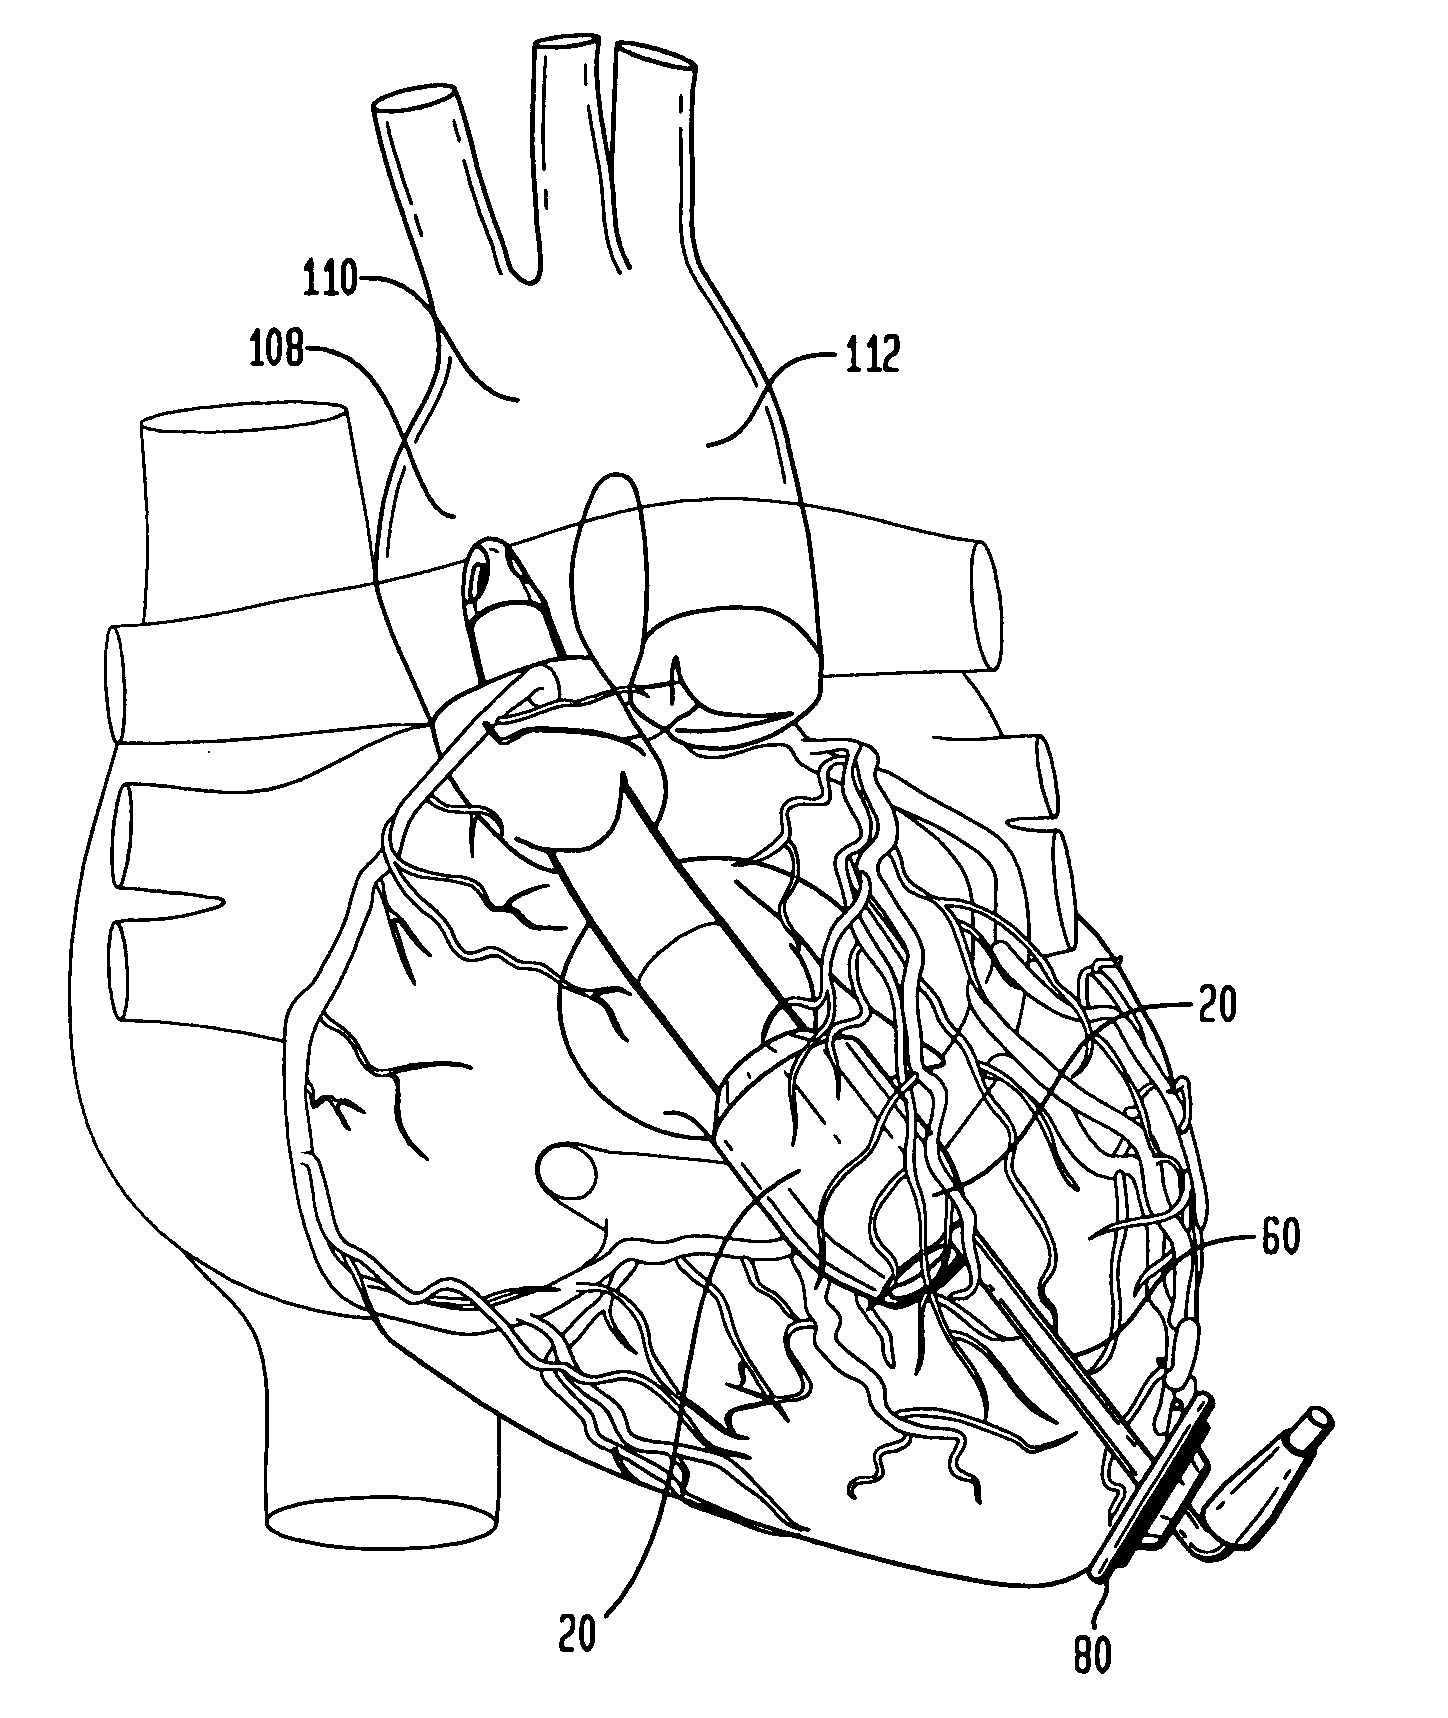 Ventricular assist device for intraventricular placement